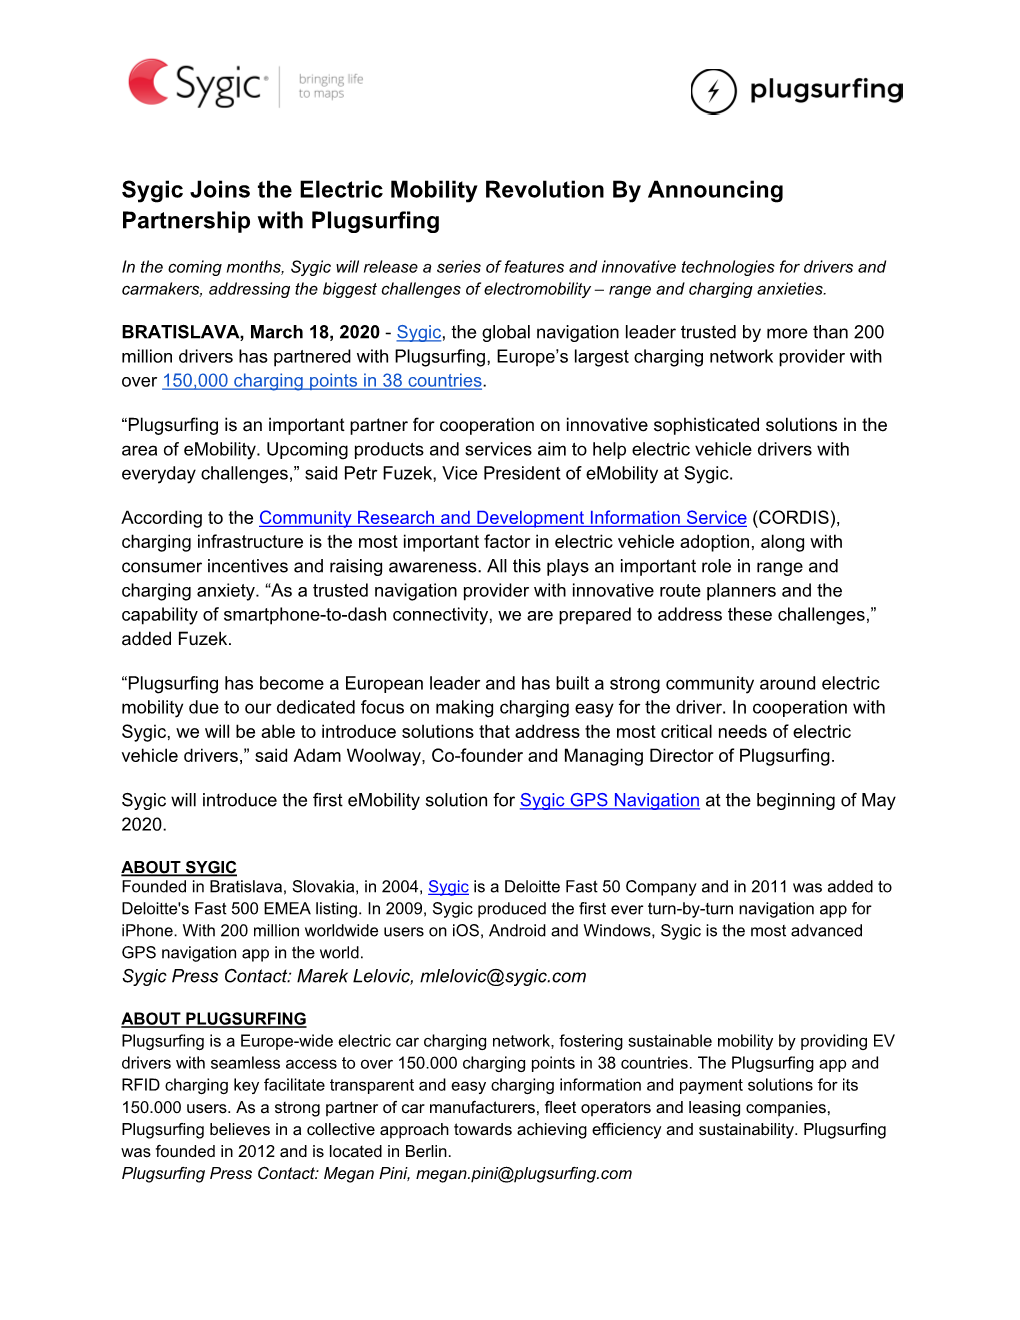 Sygic Joins the Electric Mobility Revolution by Announcing Partnership with Plugsurfing